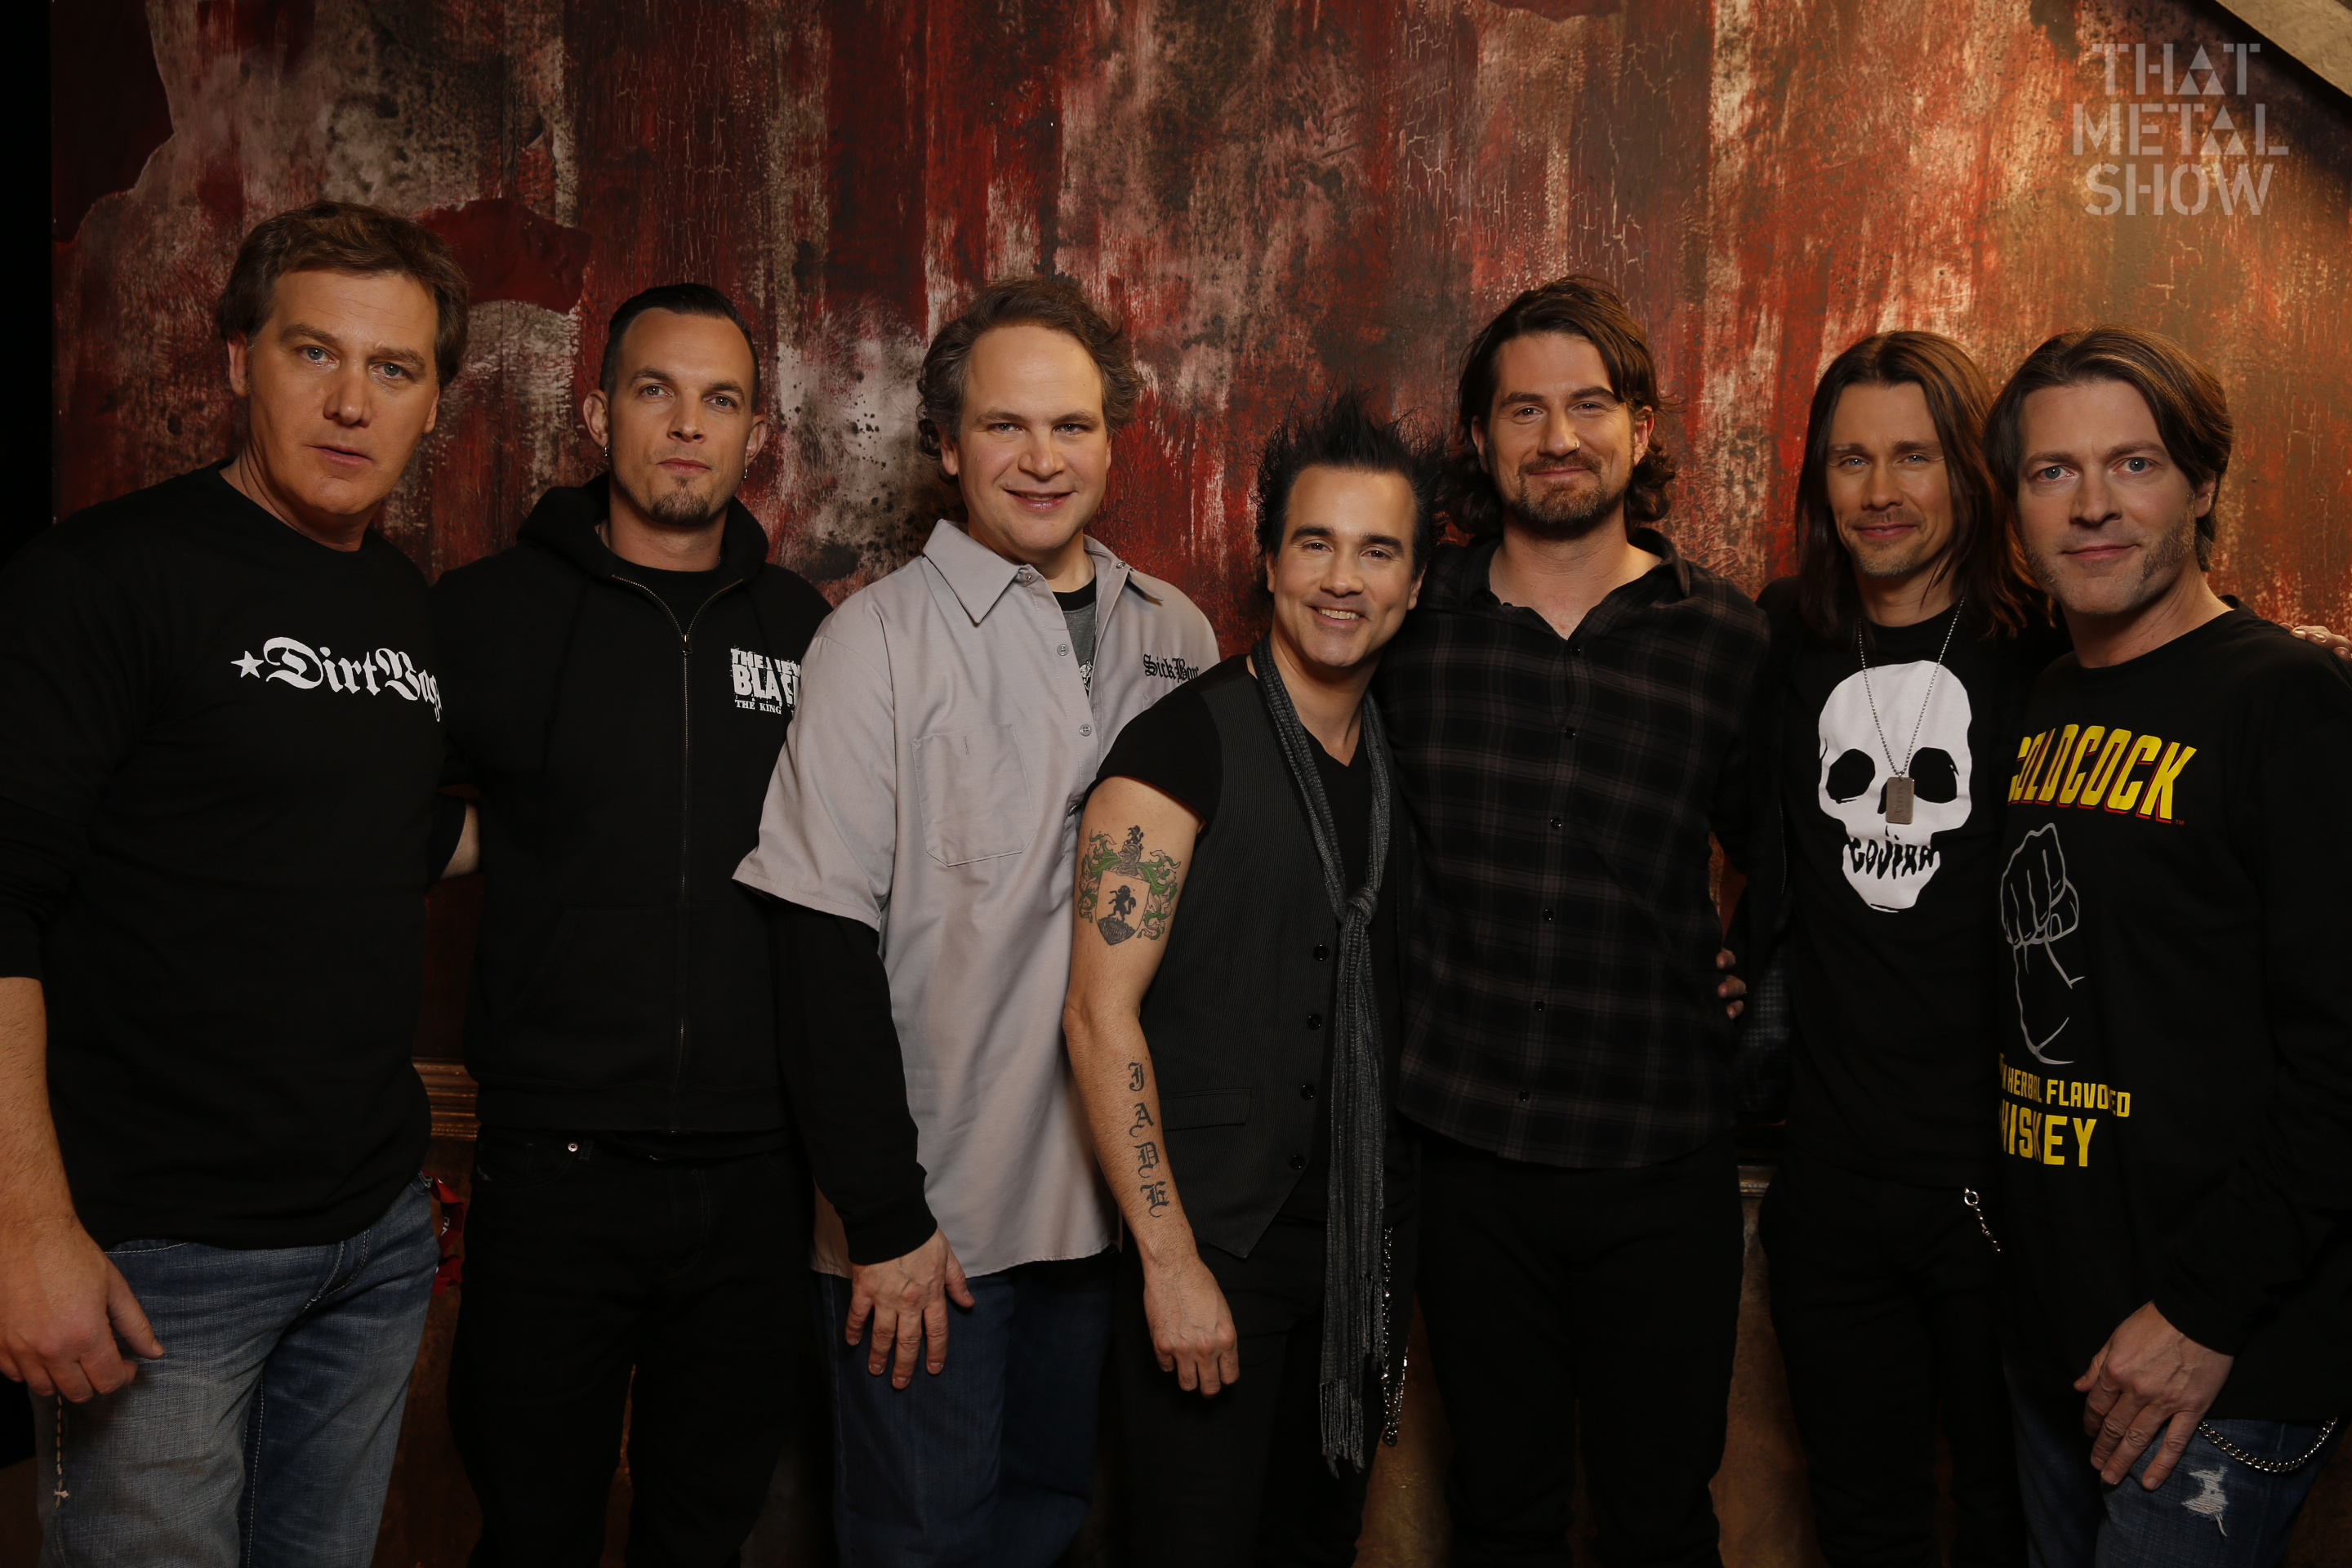 ALTER BRIDGE AND MATT NATHANSON BRING HEAVY AND LIGHT TO THIS WEEK’S ‘THAT METAL SHOW’